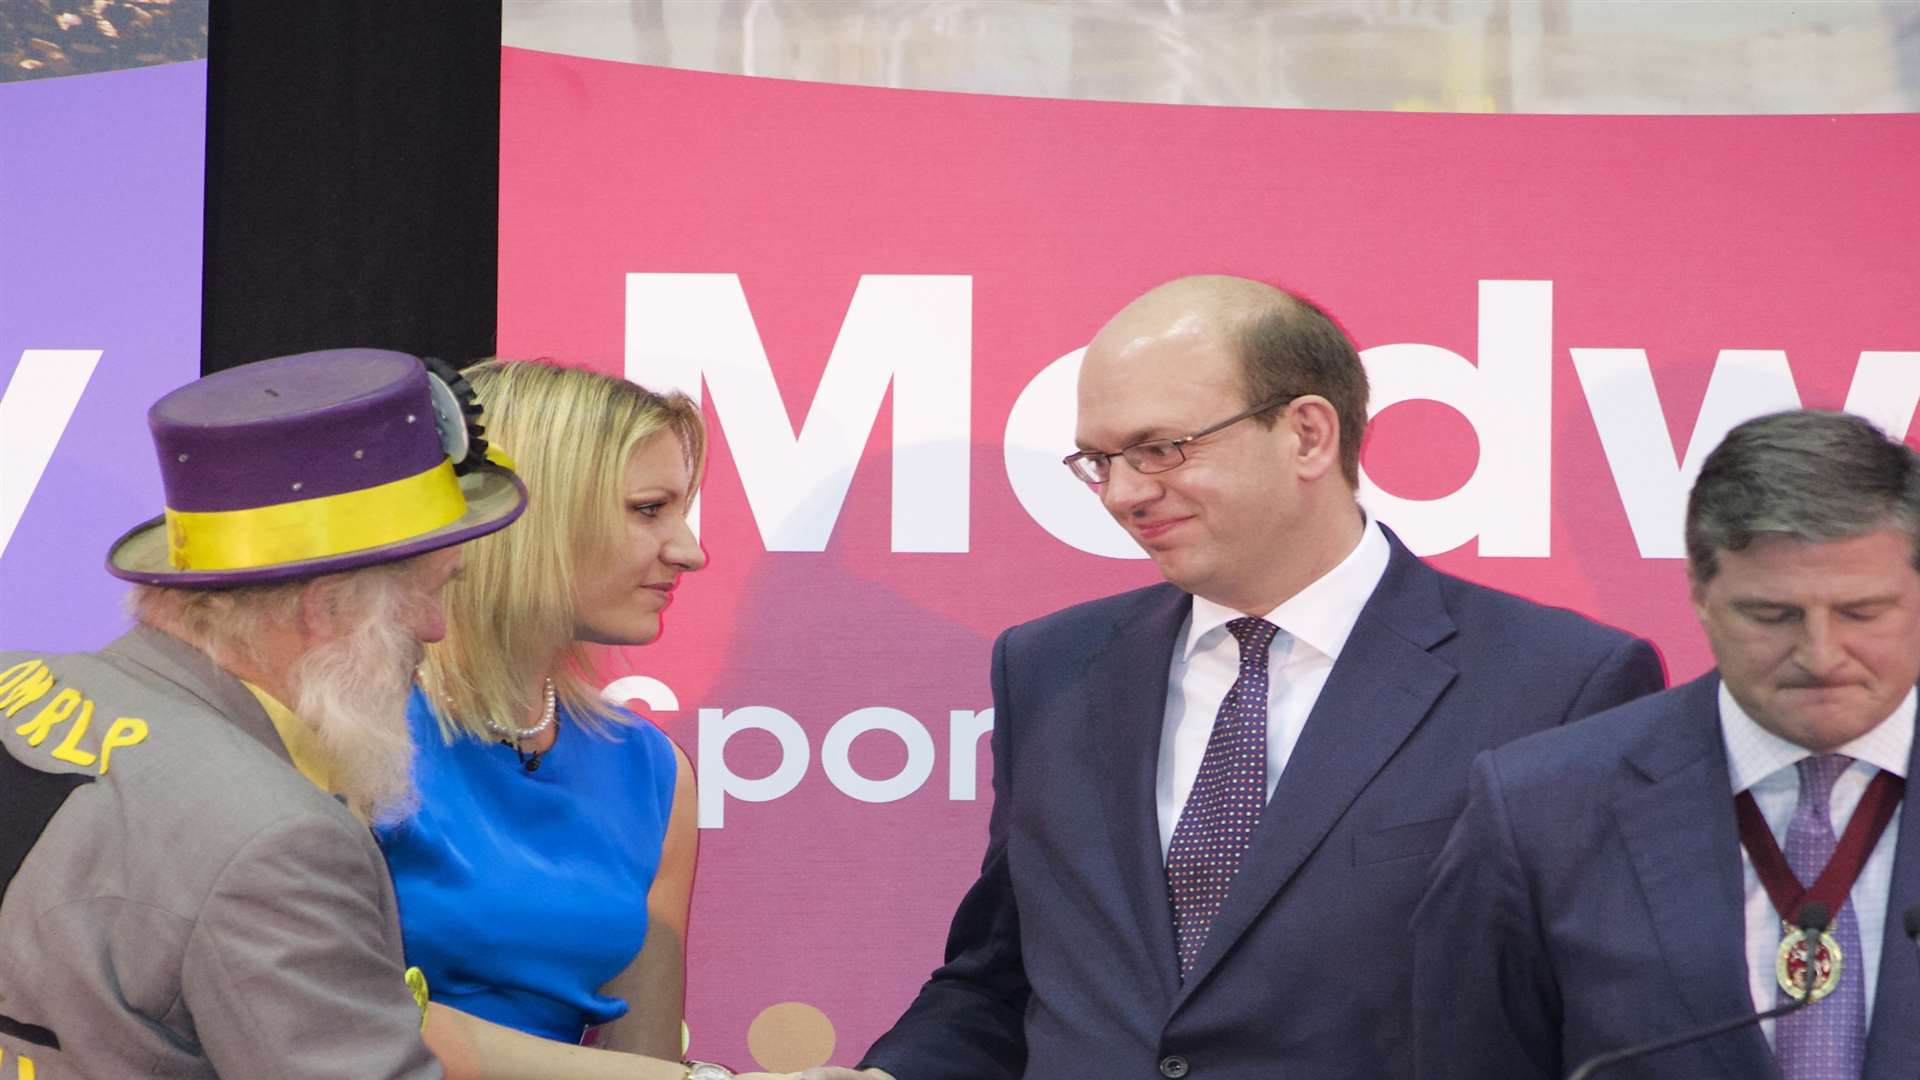 By-election winner Mark Reckless shakes other candidates' hands